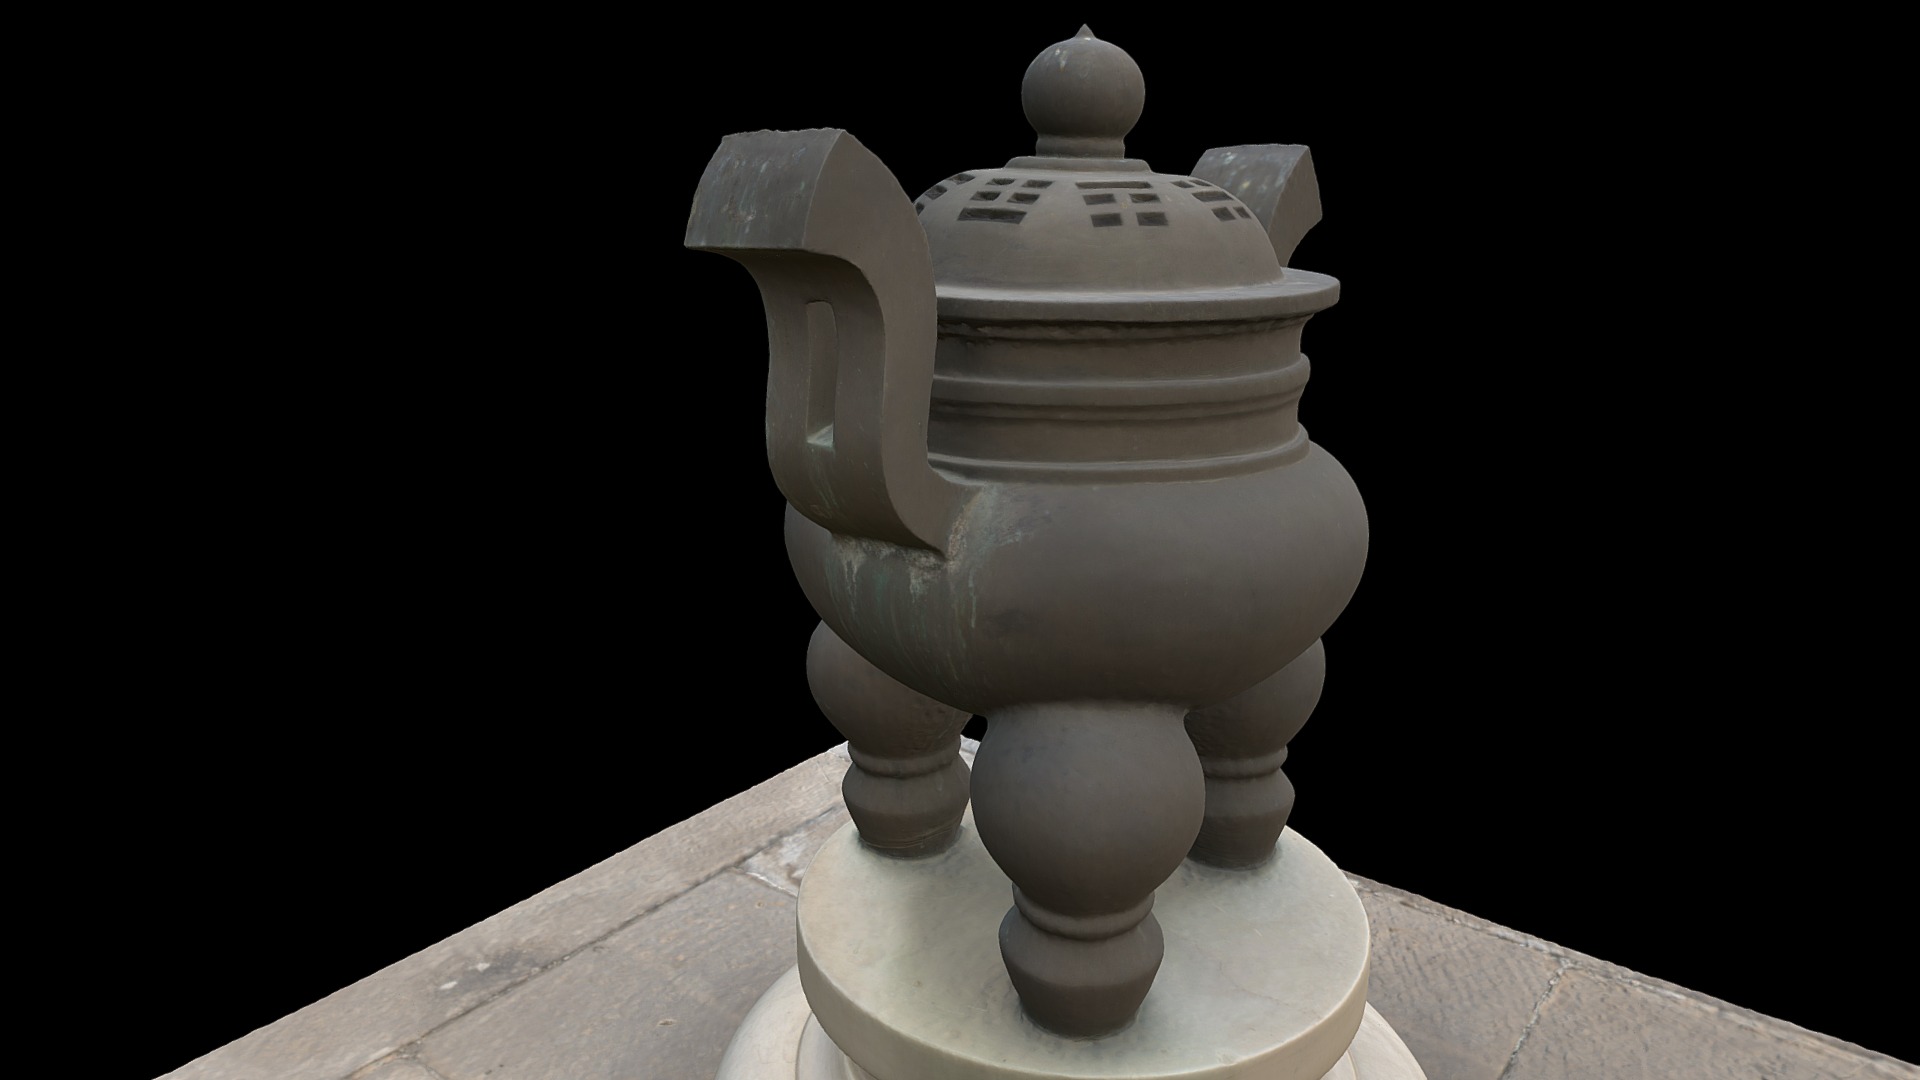 3D model 2018-09 – Beijing 27 - This is a 3D model of the 2018-09 - Beijing 27. The 3D model is about a white statue on a table.